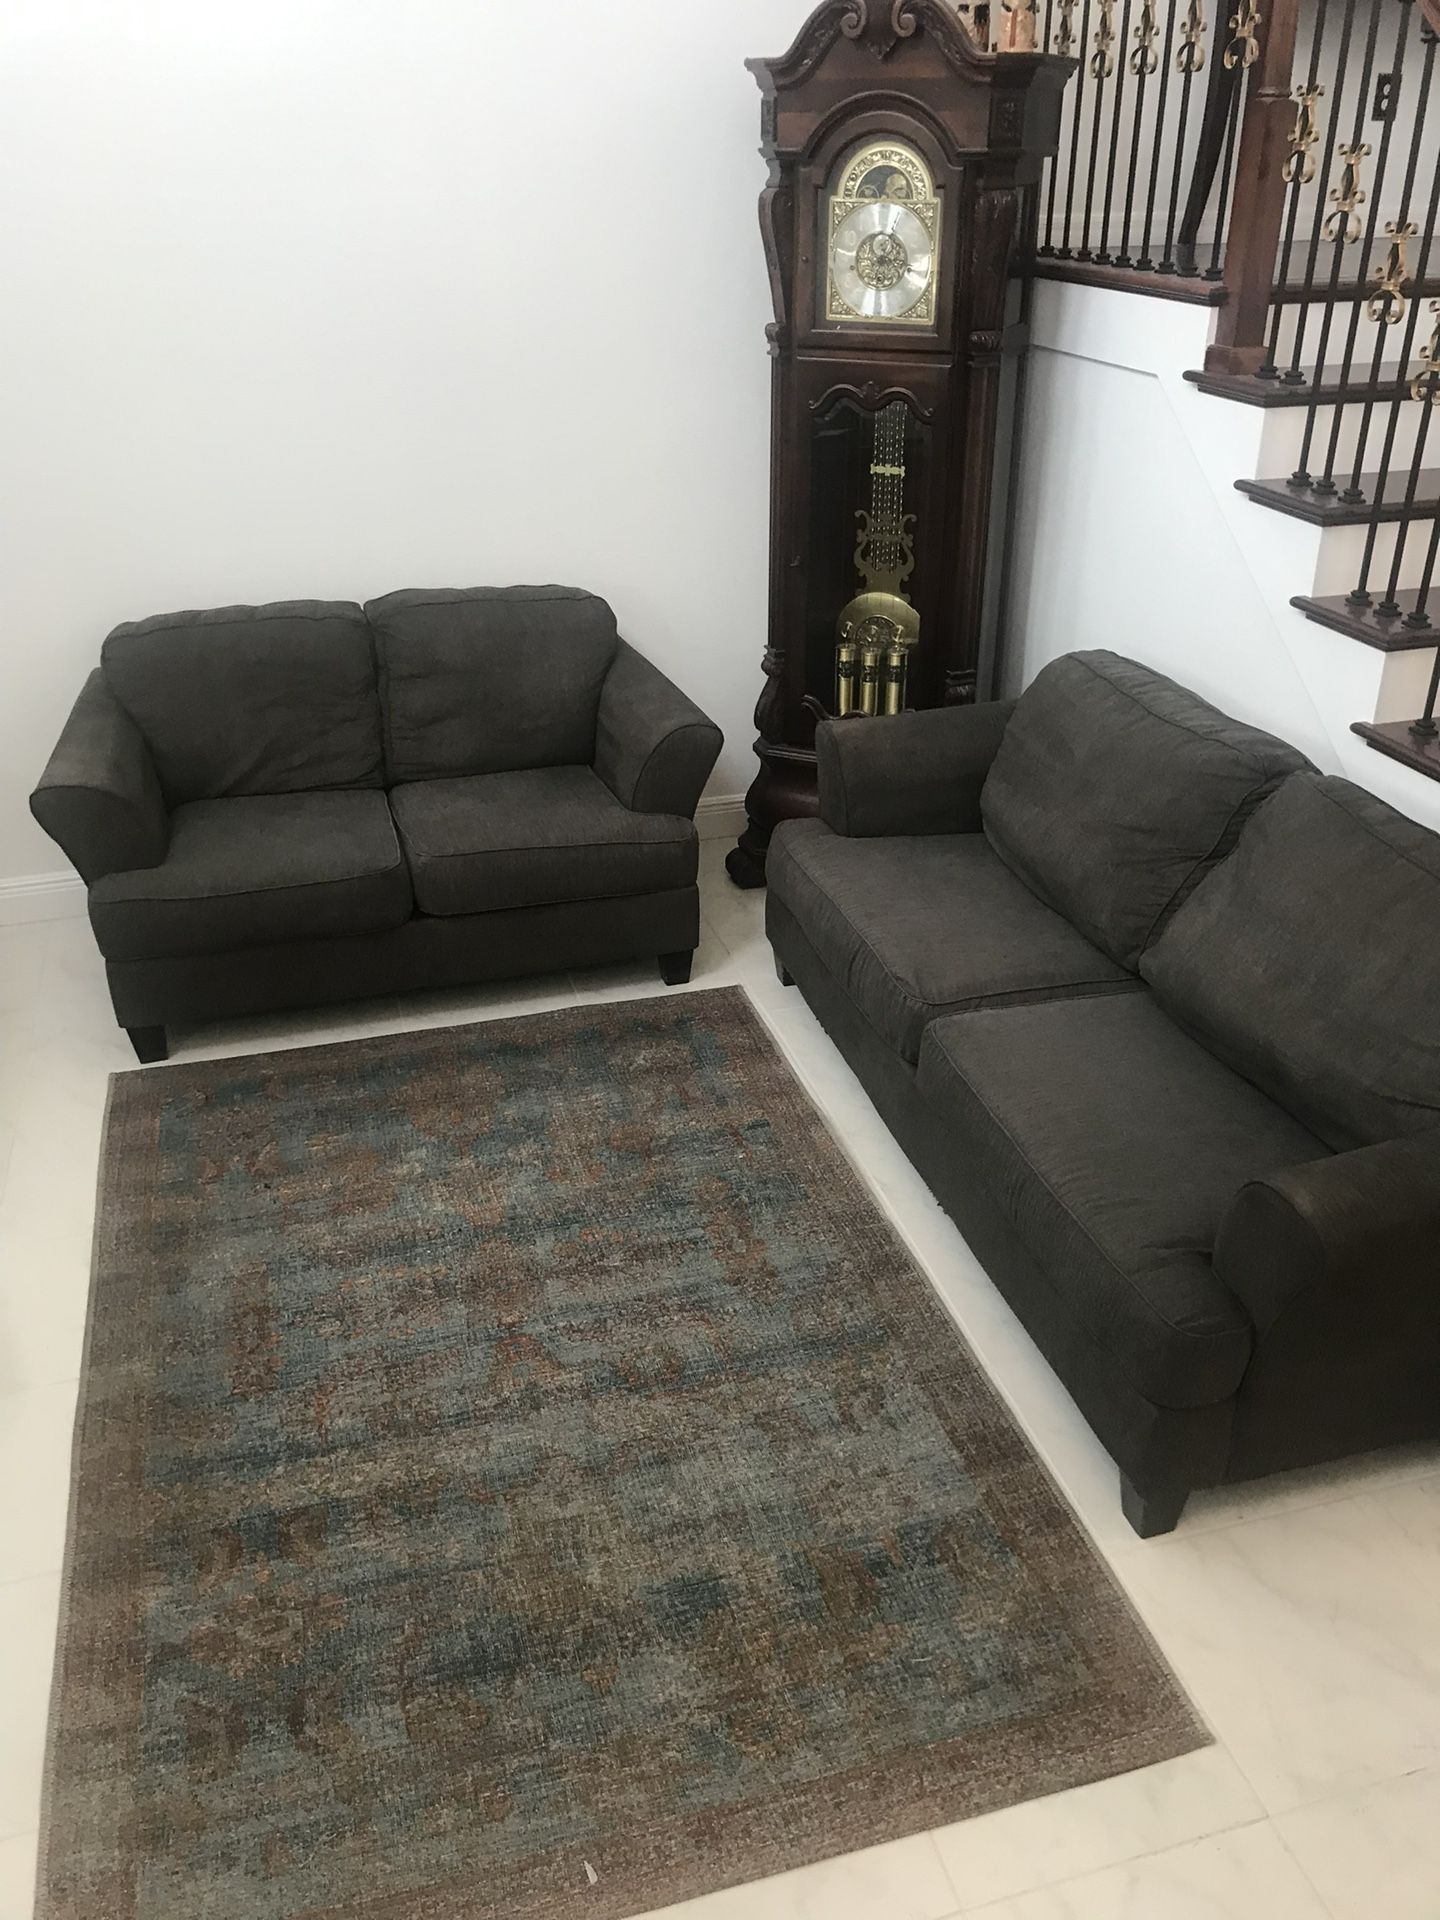 Gray Fabric Ashley Furniture Sofa Set In Good Condition FREE Local Delivery 🚚 